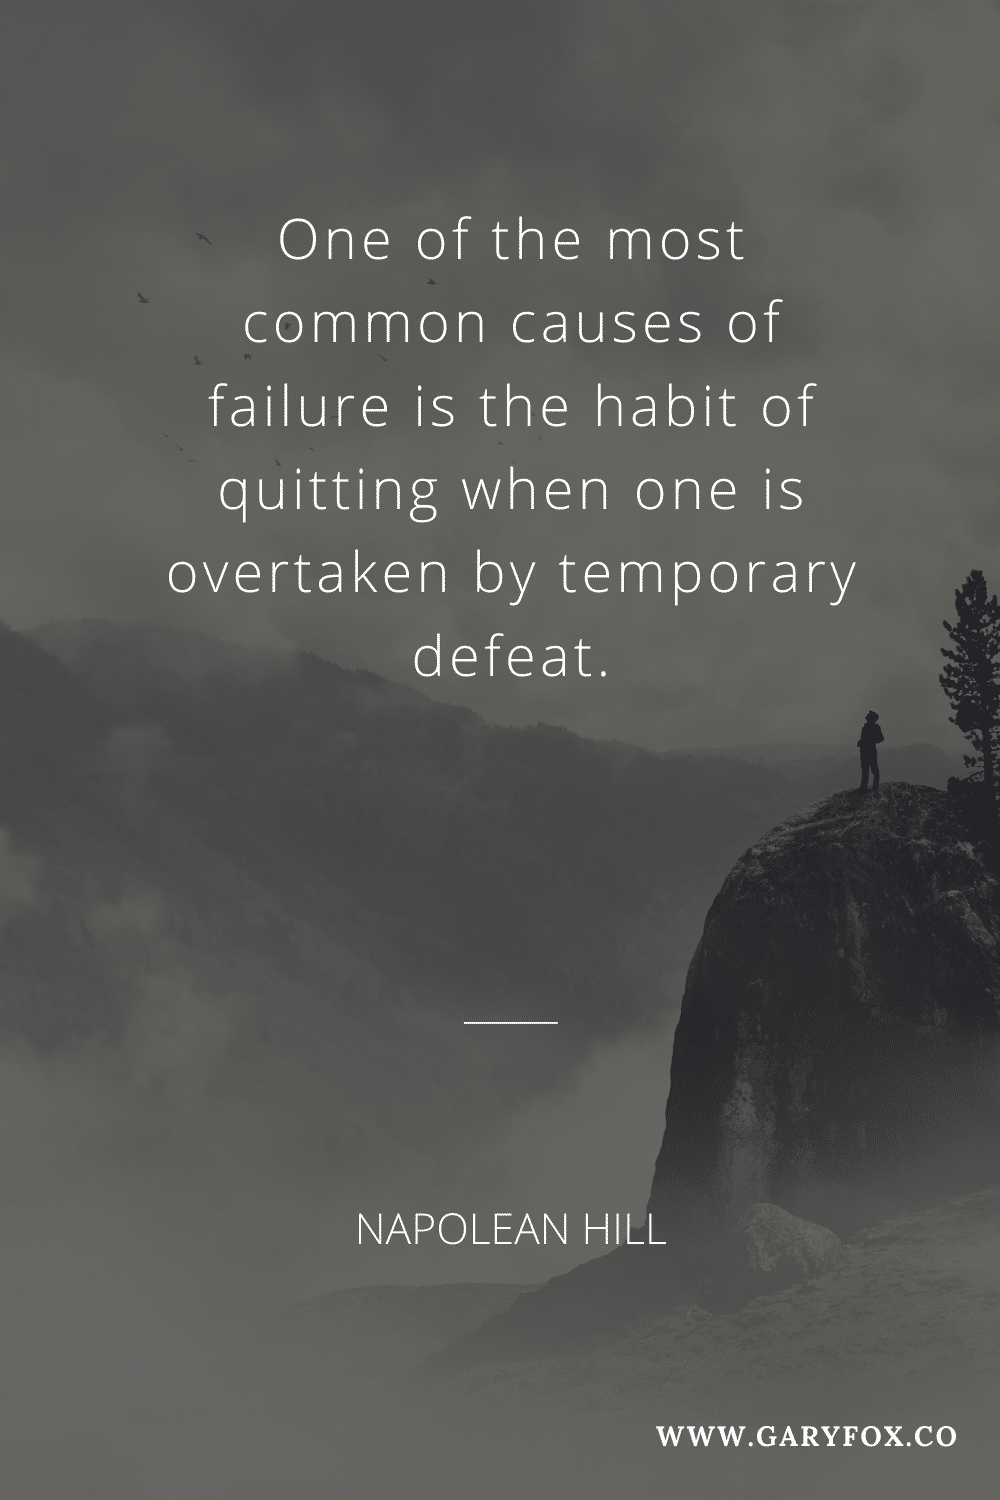 One Of The Most Common Causes Of Failure Is The Habit Of Quitting When One Is Overtaken By Temporary Defeat.